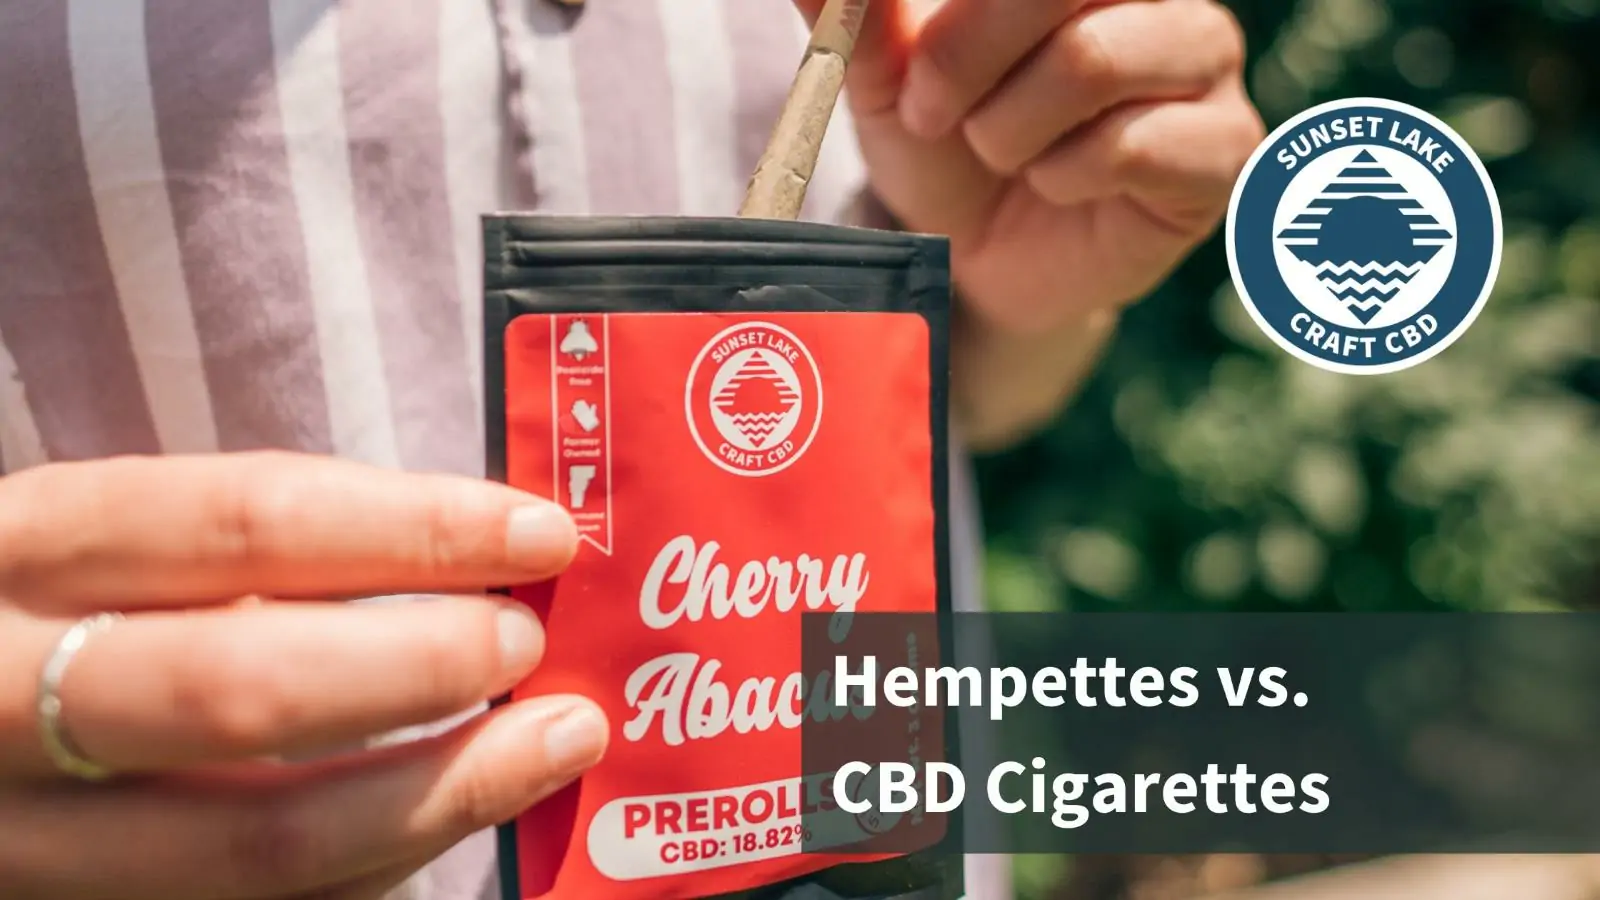 The Important Differences Between Hempettes vs. CBD Cigarettes